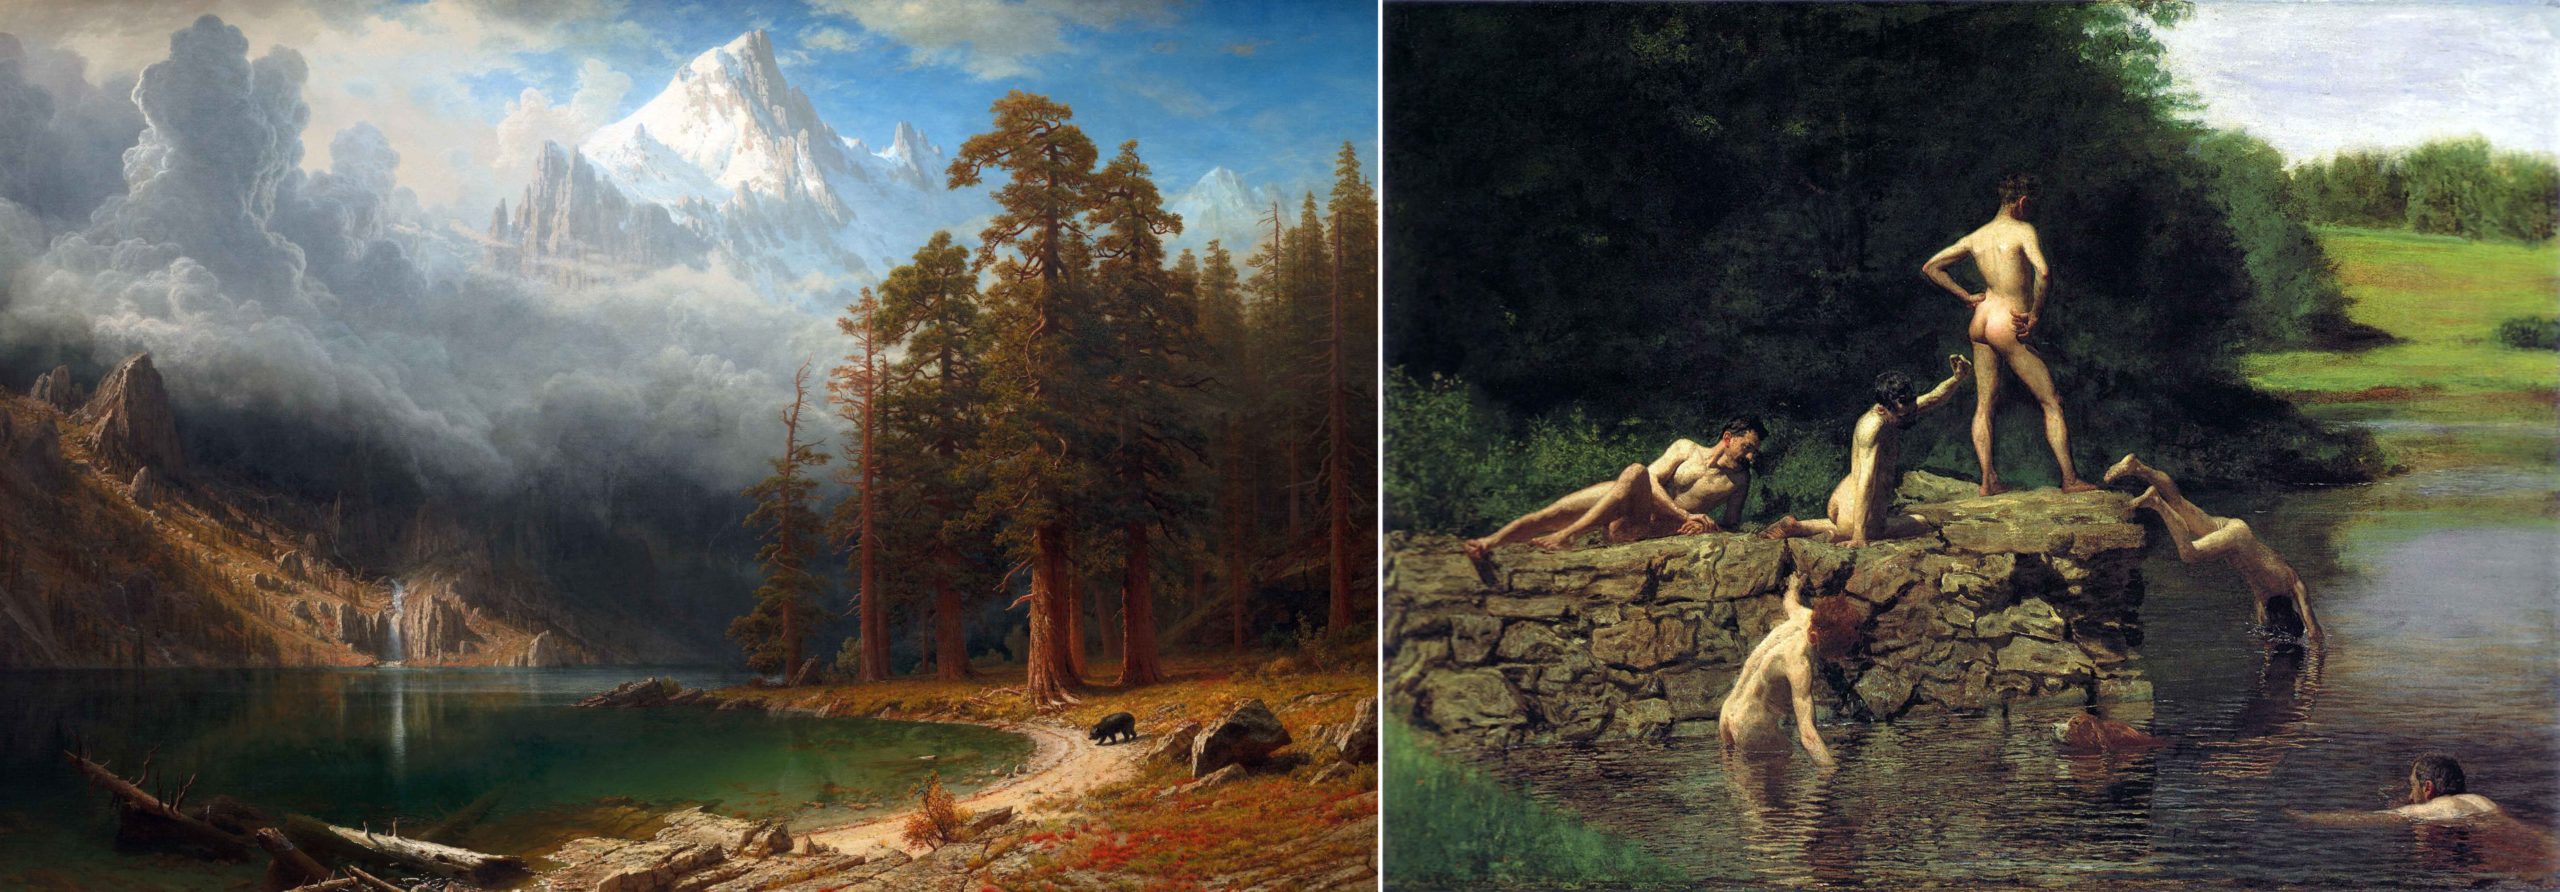 Left: Albert Bierstadt, Mount Corcoran, c. 1876–77, oil on canvas 154.1 x 243.5 cm (National Gallery of Art); right: Thomas Eakins, Swimming, 1885, oil on canvas, 27 3/8 x 36 3/8 in. (Amon Carter Museum)